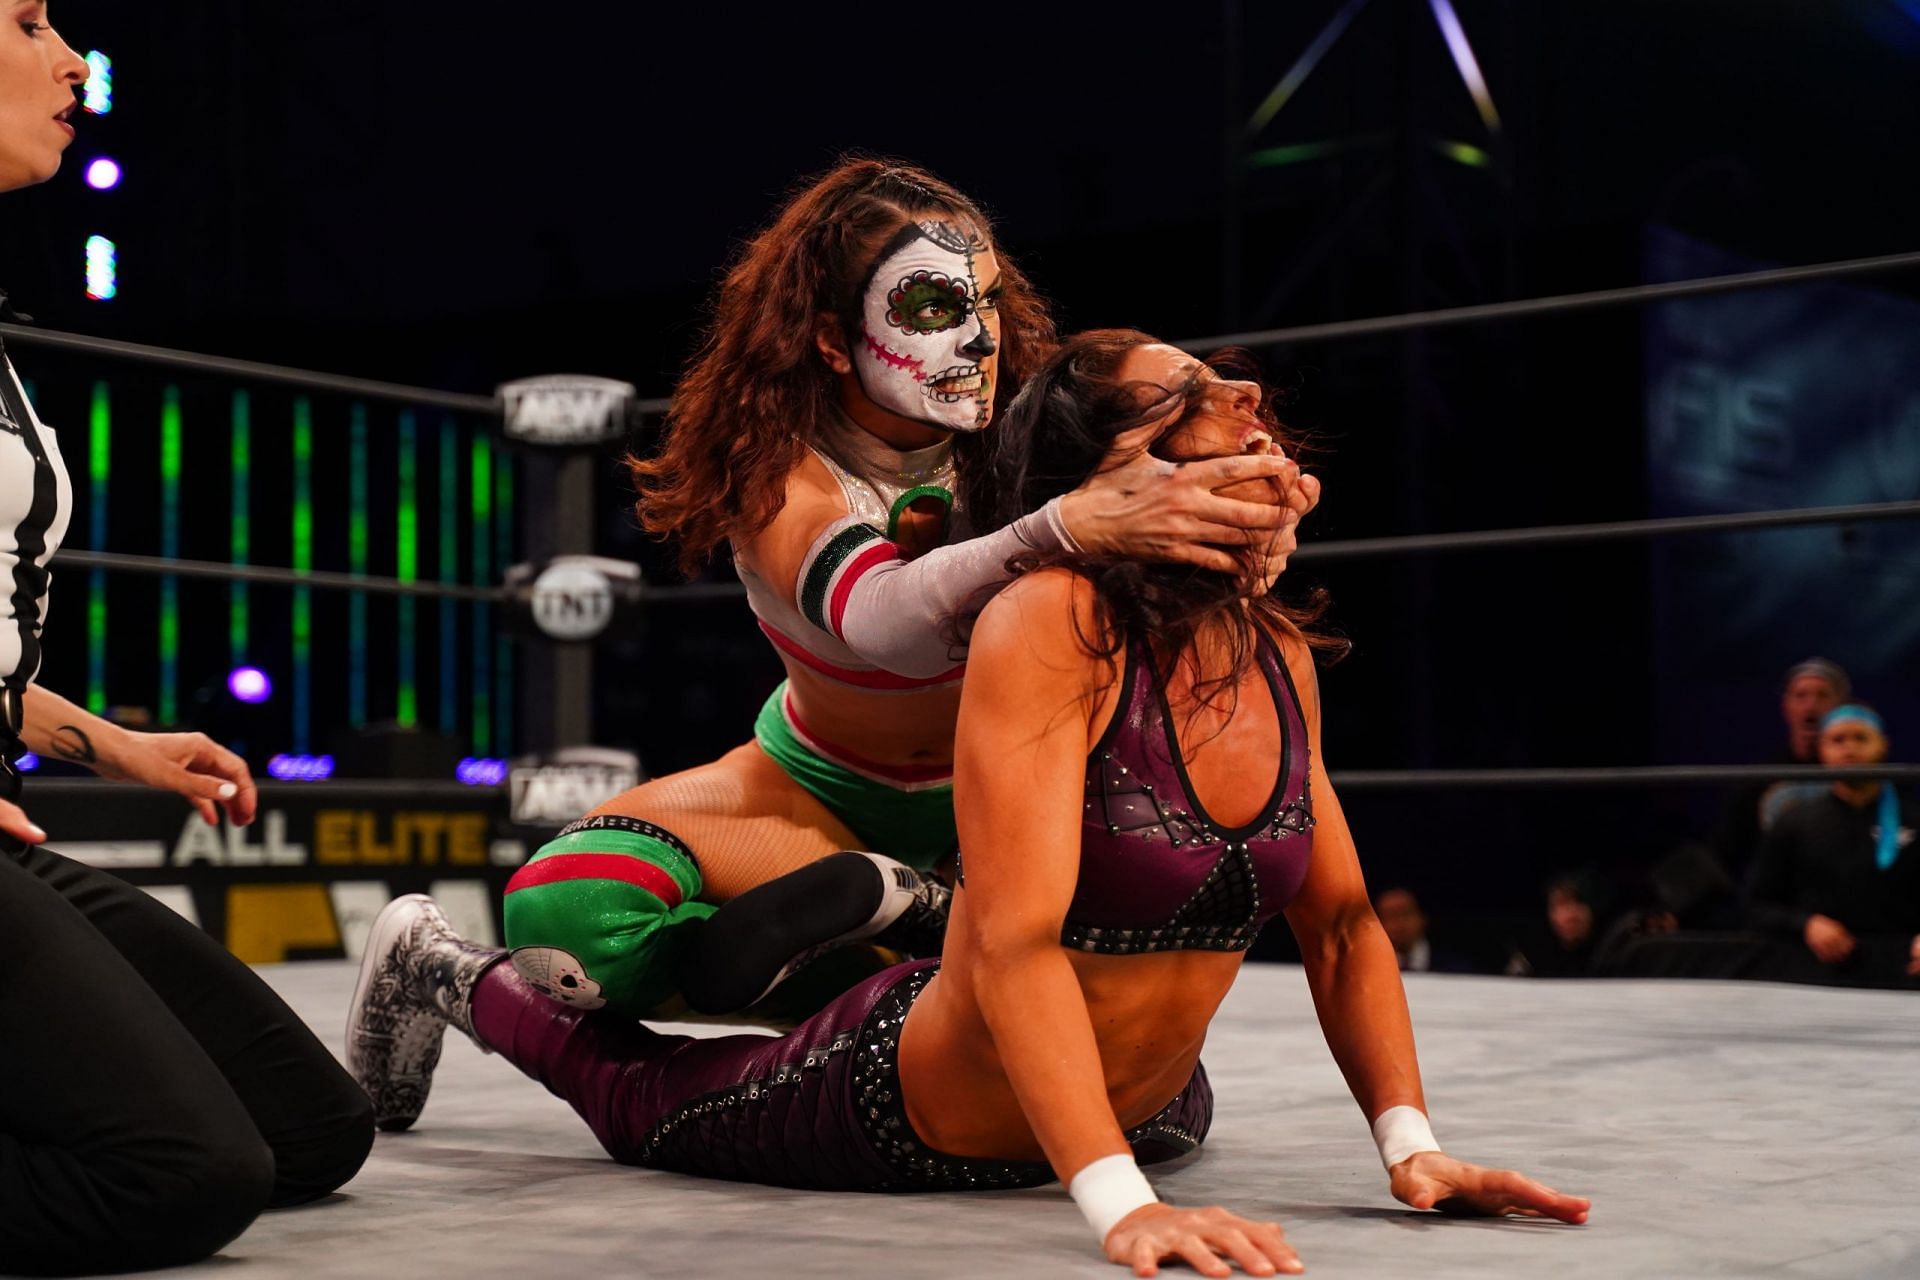 Thunder Rosa is one of the most popular stars in AEW